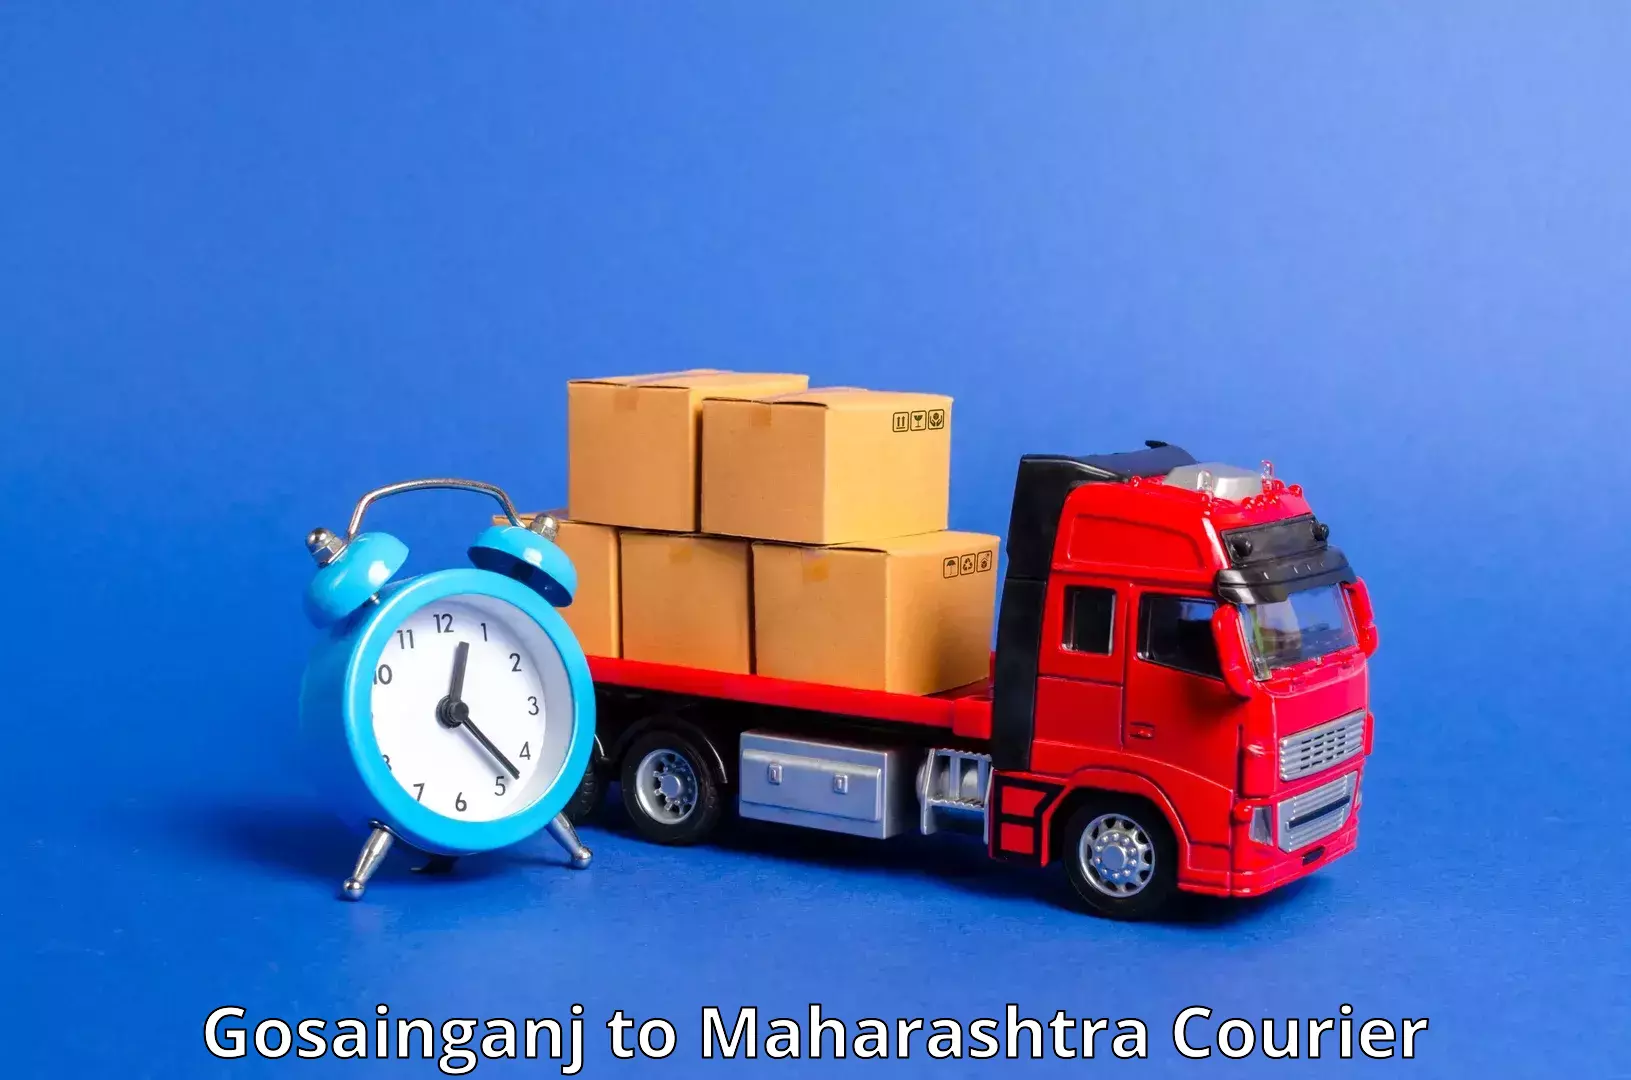 Reliable delivery network Gosainganj to Alephata